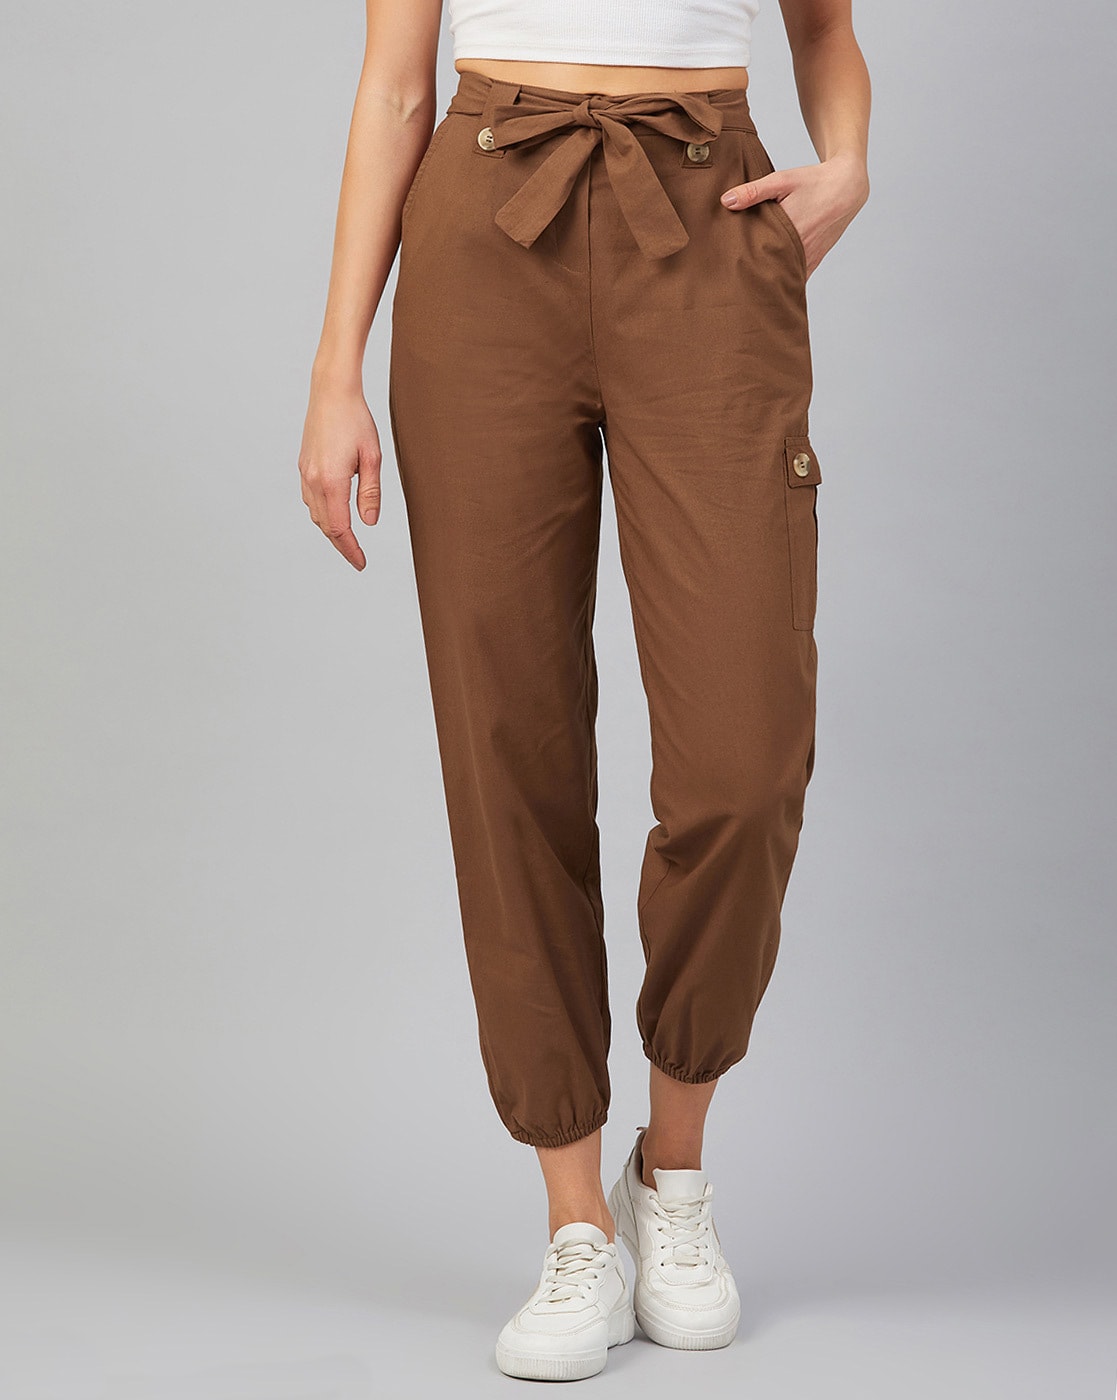 STREET 9 Women Beige Loose Fit HighRise Trousers Price in India Full  Specifications  Offers  DTashioncom